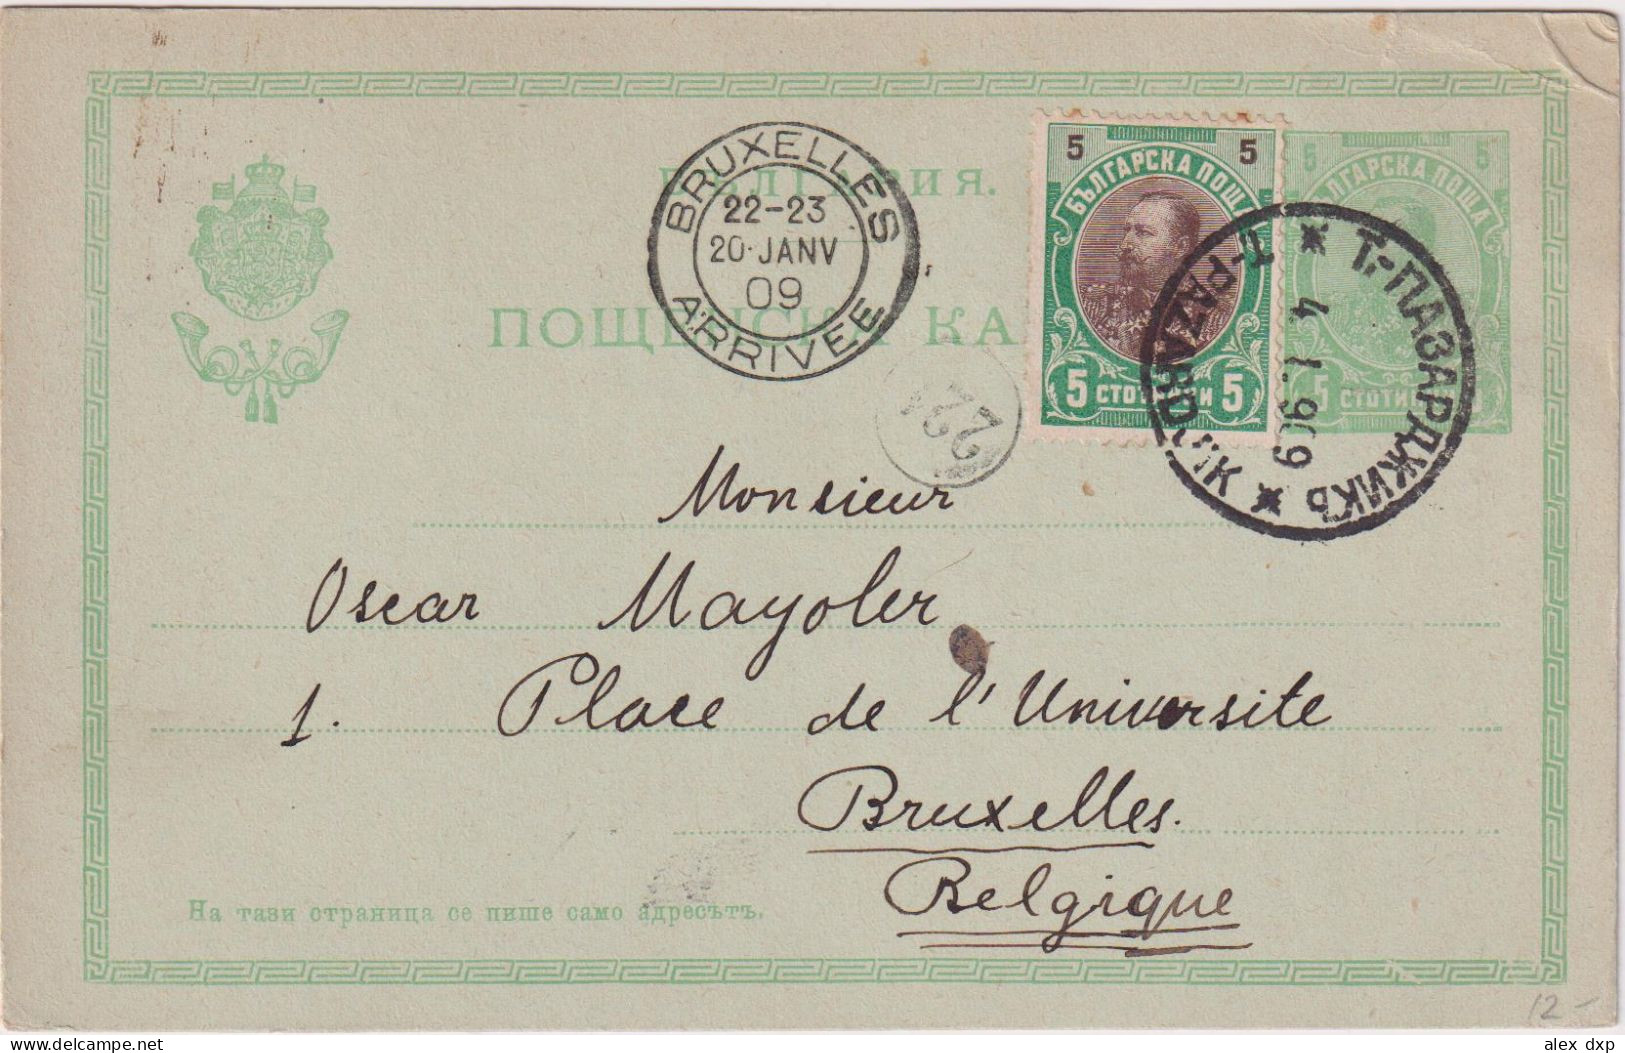 BULGARIA > 1909 POSTAL HISTORY > Stationary Card From T-Pazardjik To Bruxelles, Belgium - Covers & Documents